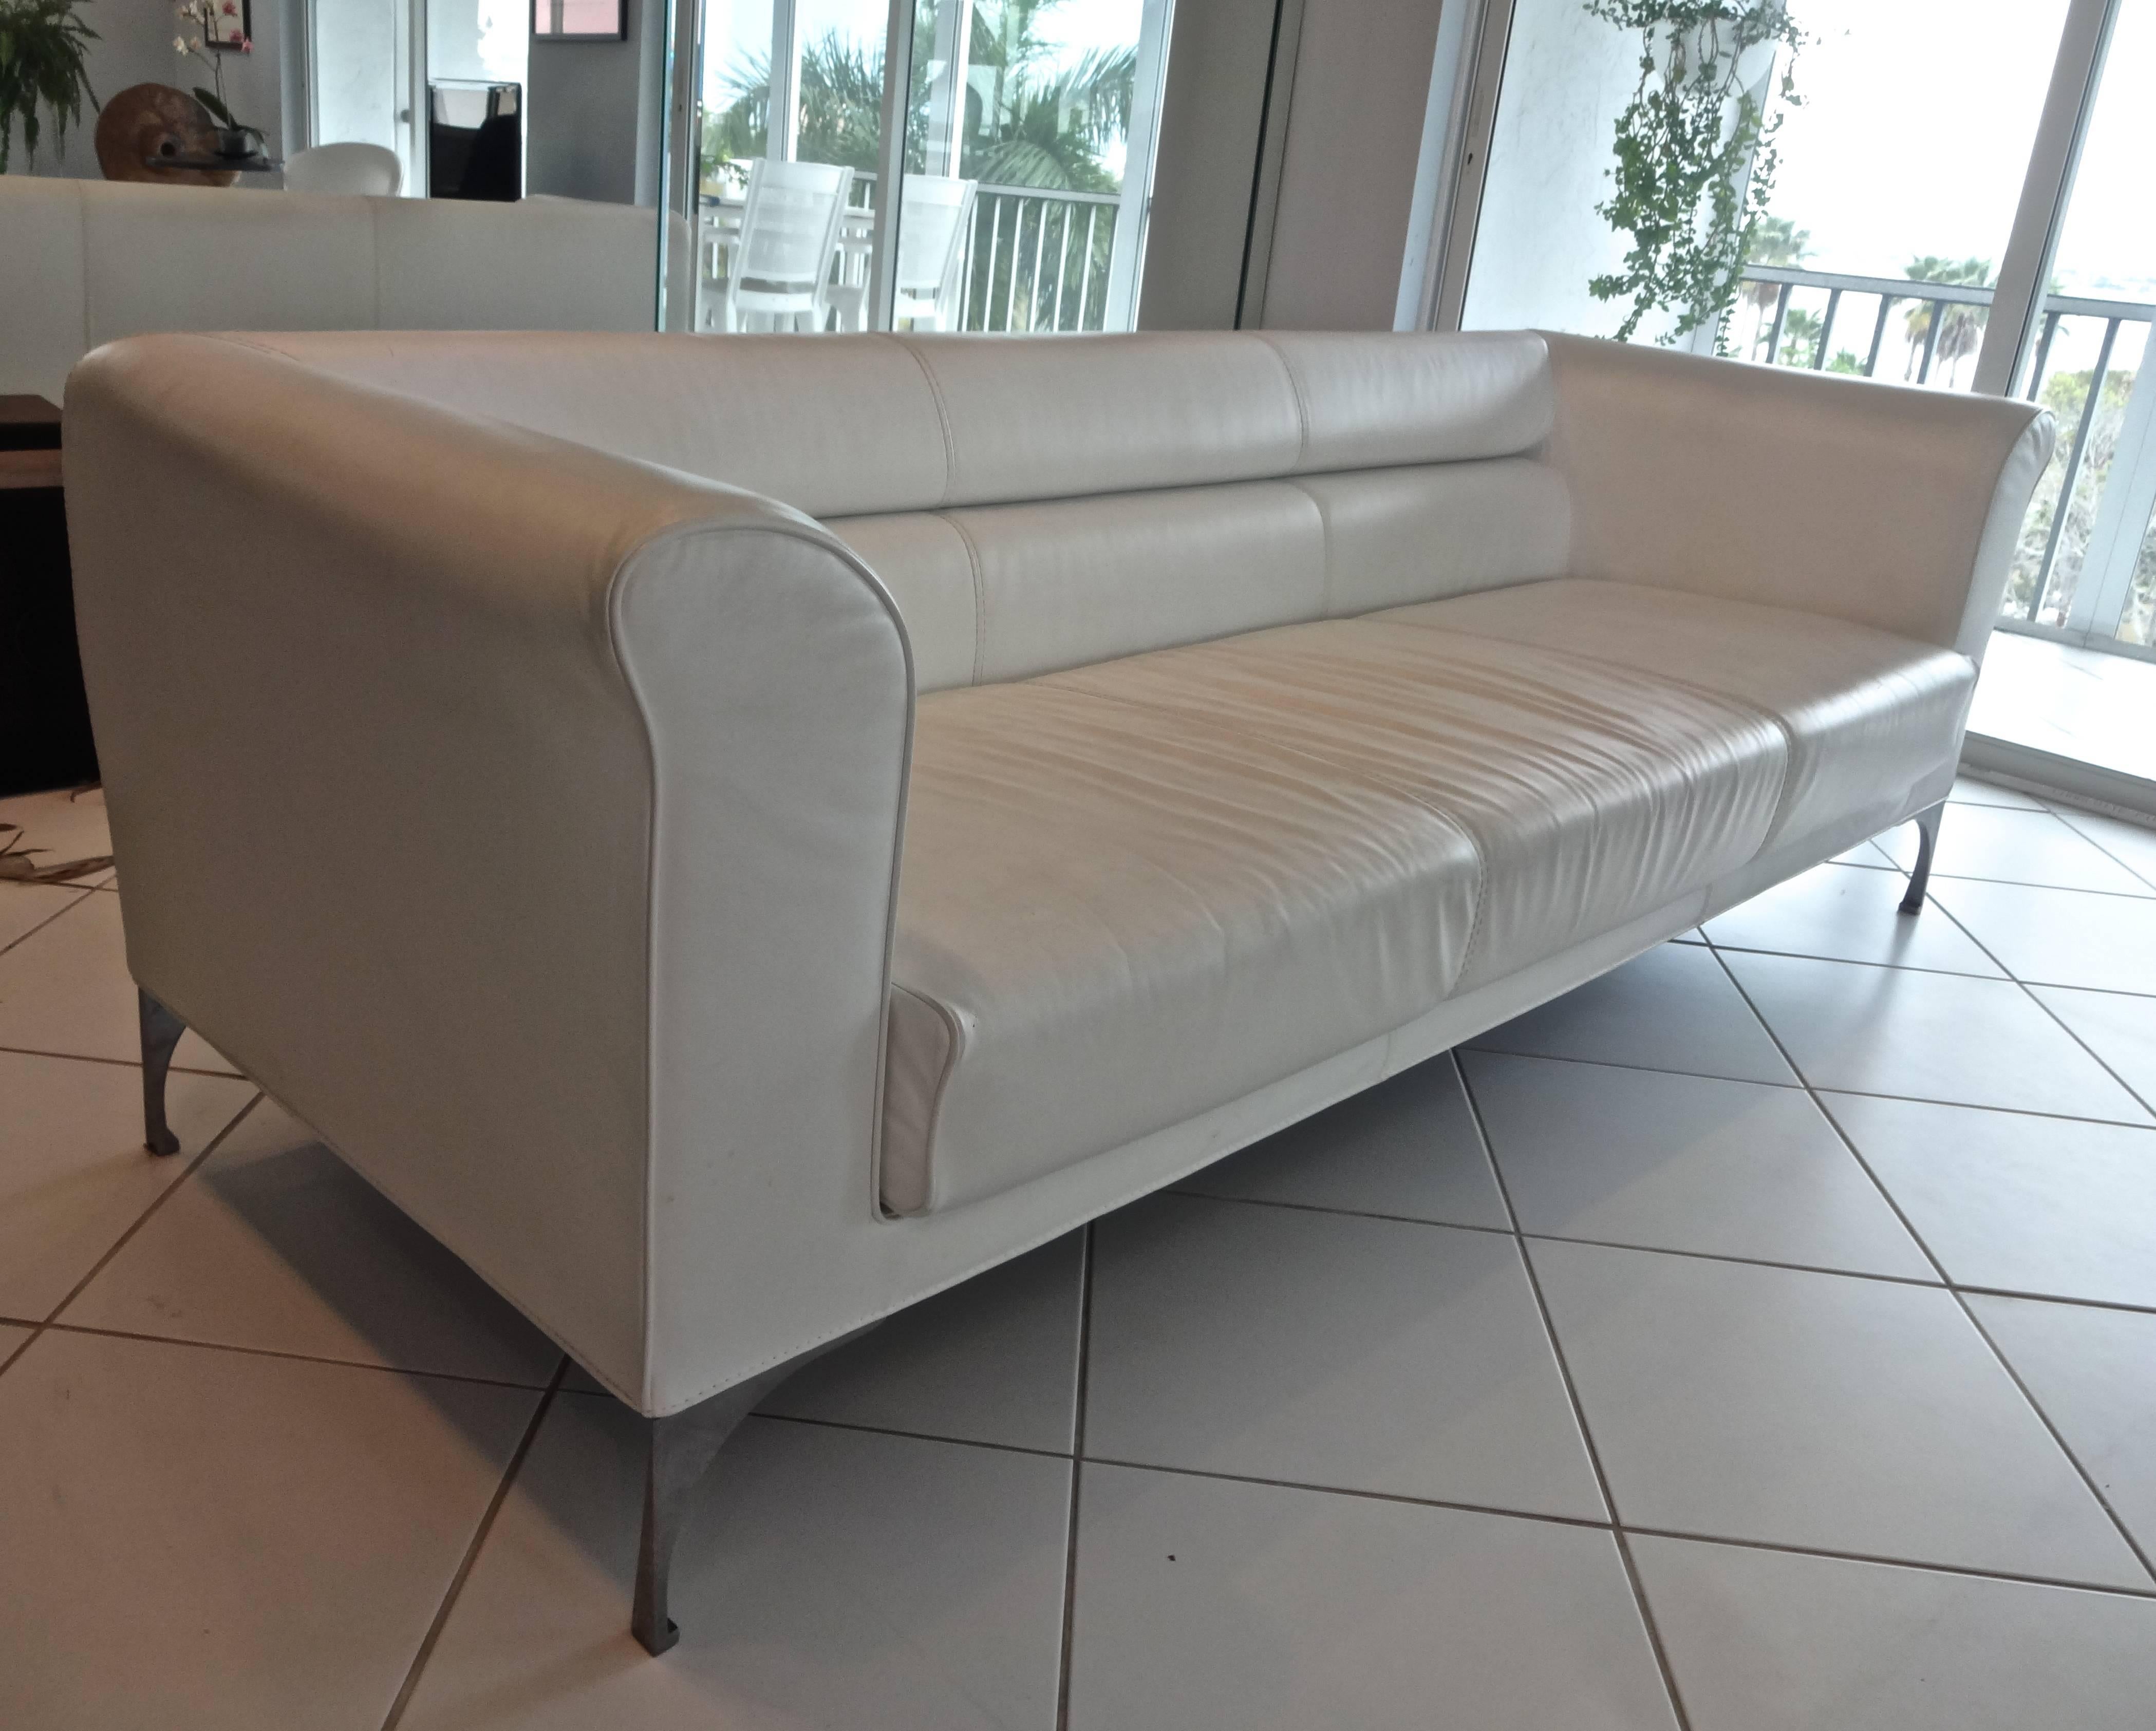 A custom modern Roche Bobois white leather three-seat sofa with polished stainless steel legs.